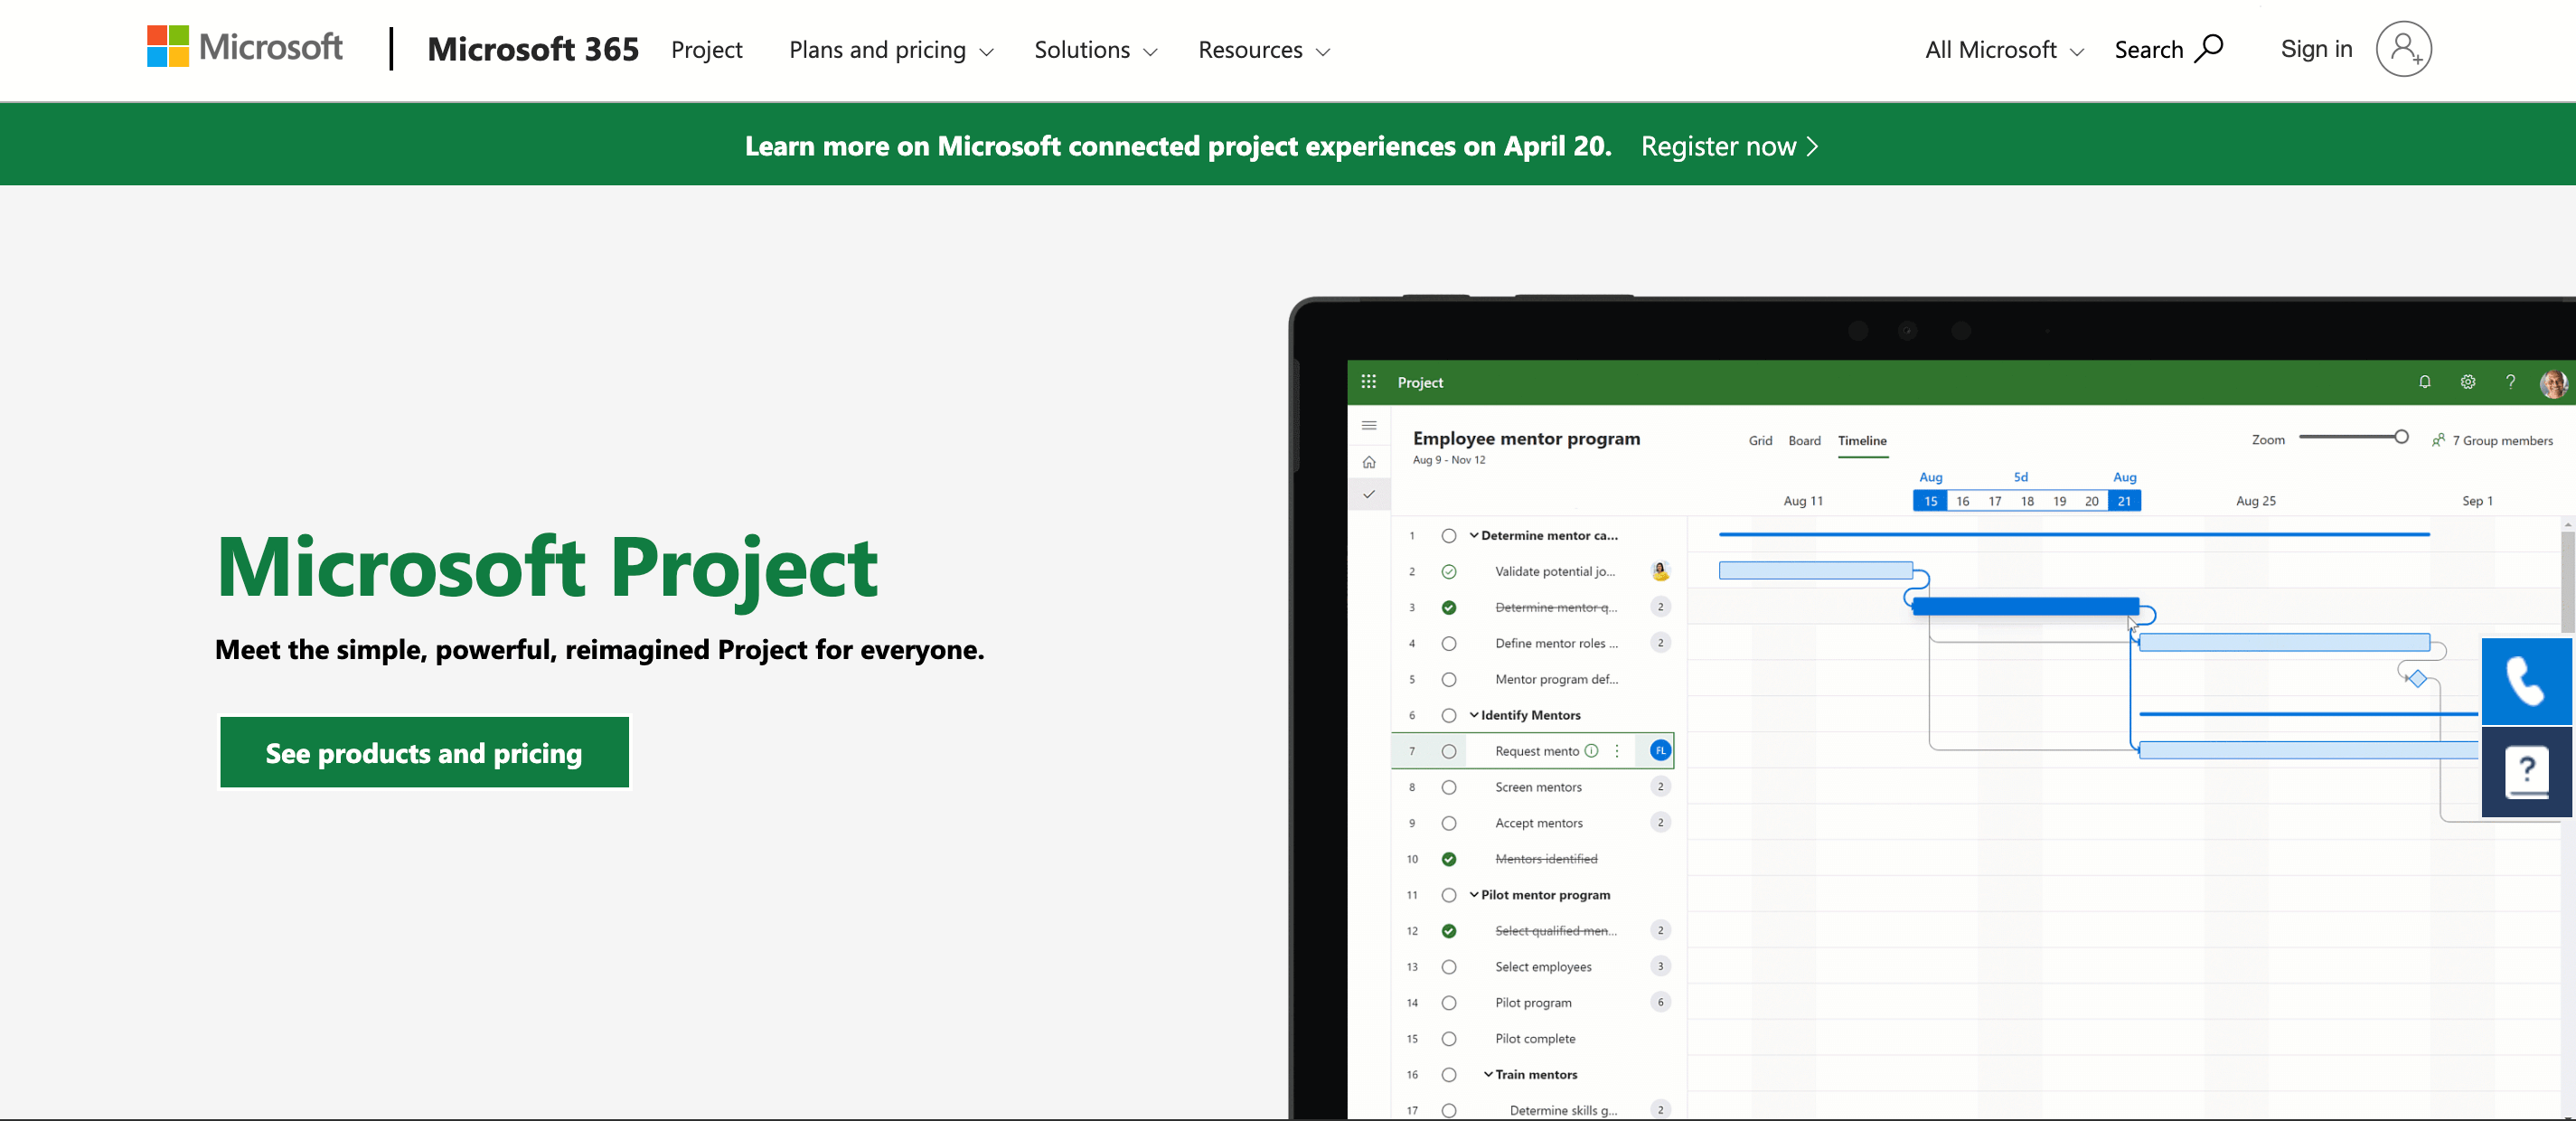 Screenshot of Microsoft Project home page